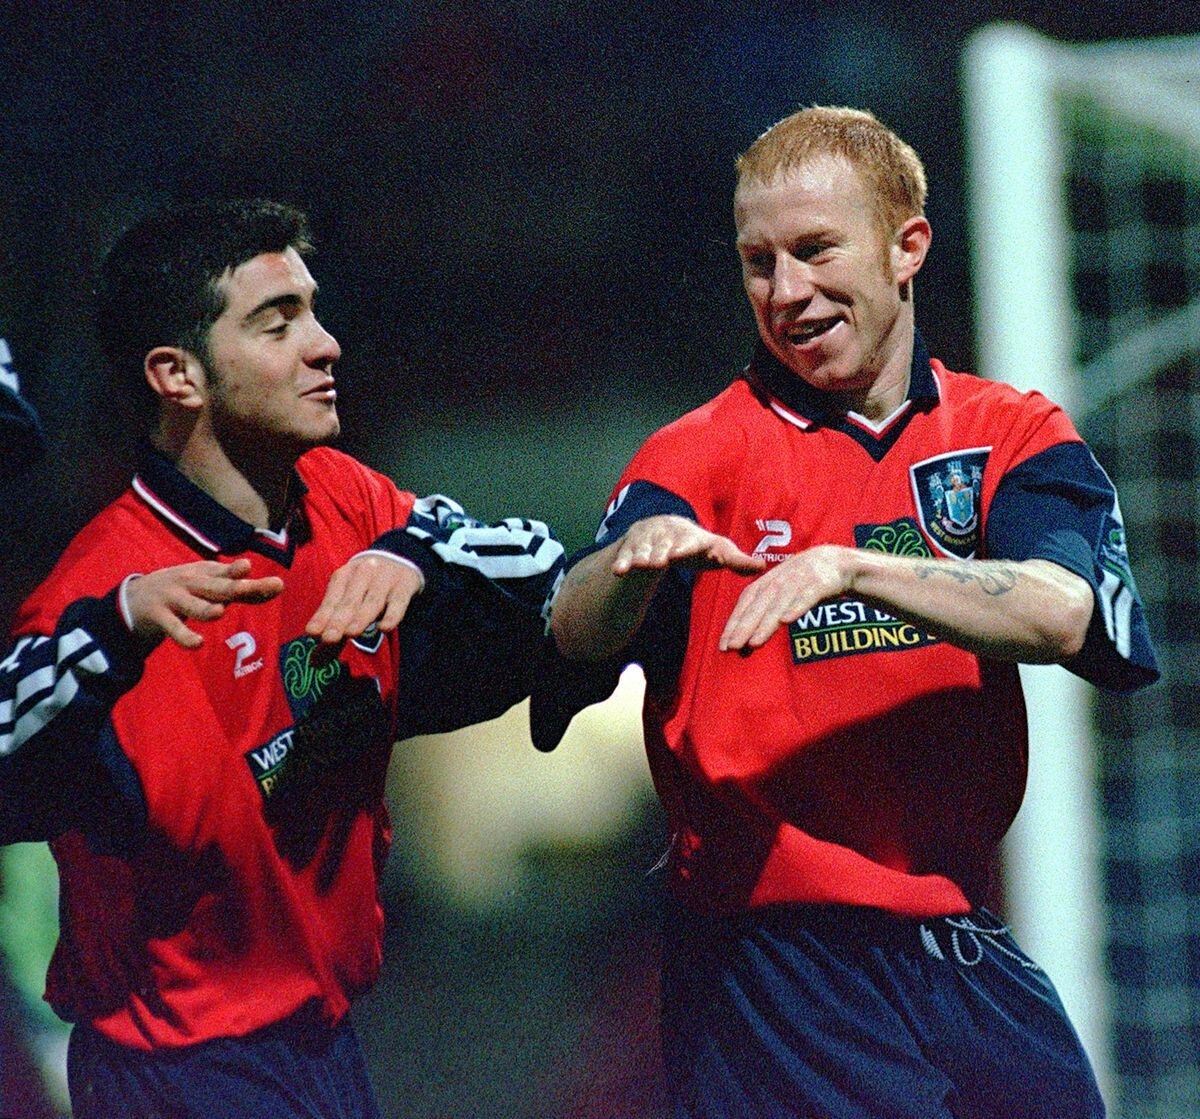 Albion's Lee Hughes celebrates his goal with team mate Enzo Maresca during the baggies 3-0 win at the McAlpine stadium.